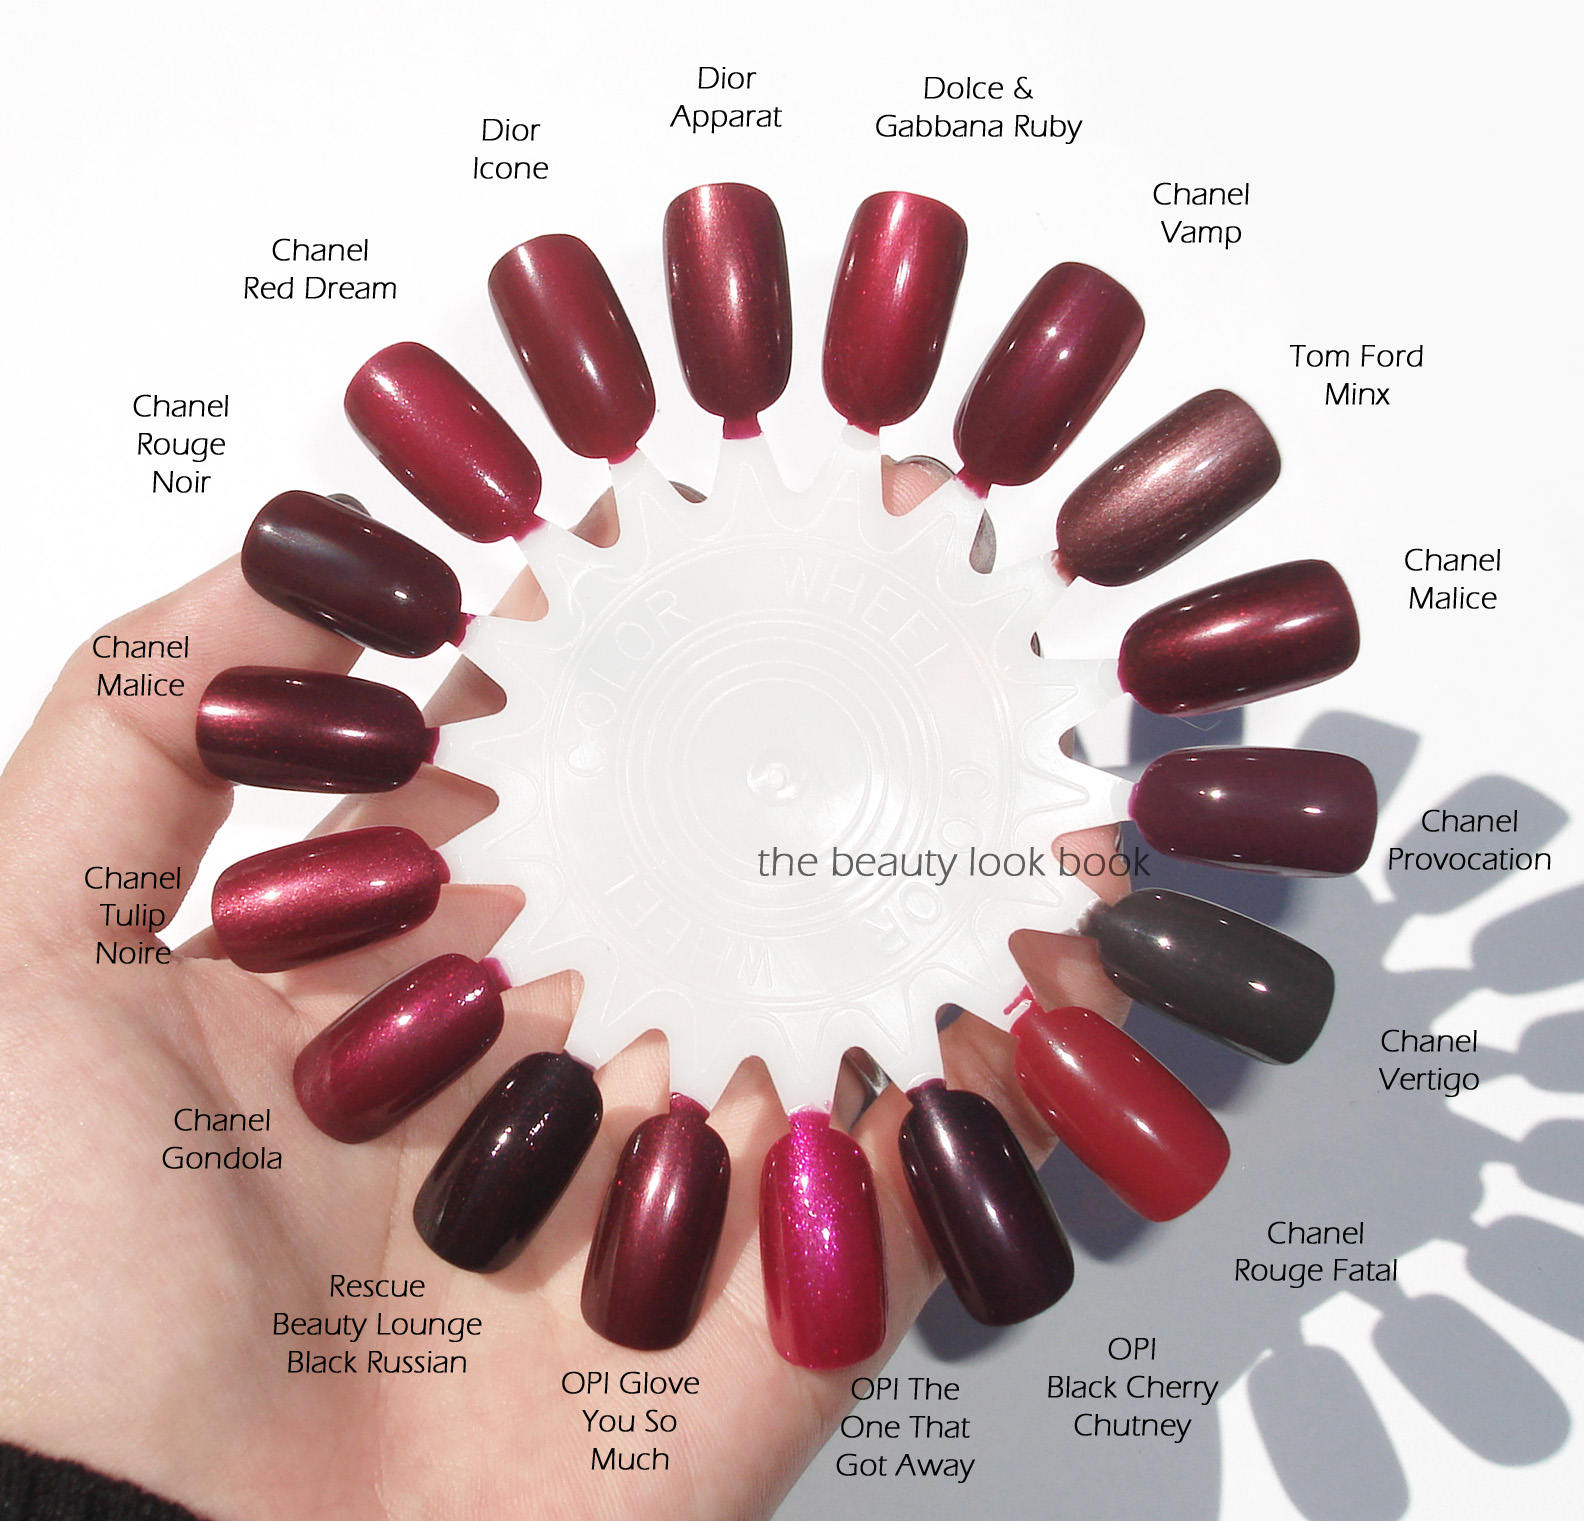 Nail Polish Archives - Page 27 of 55 - The Beauty Look Book